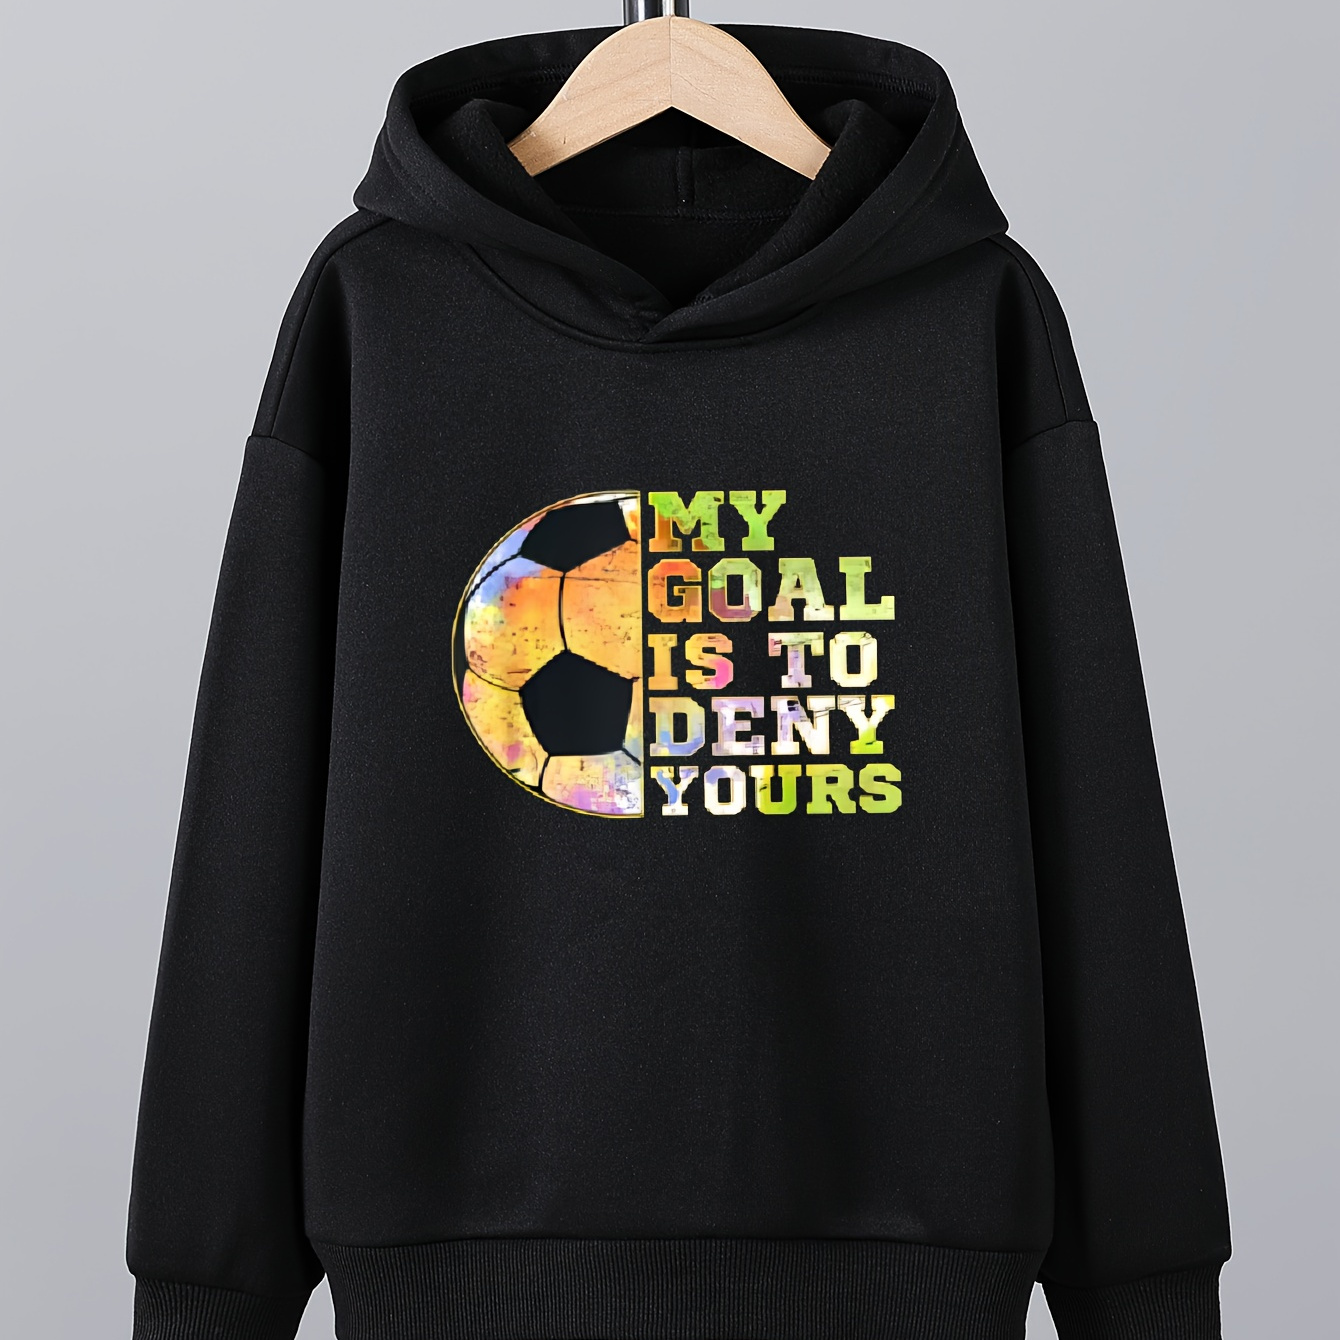 

Colorful Football And My Goal Is To Deny Yours Letter Print Sweatshirt For Boys - Cool, Lightweight And Comfy Spring Fall Winter Clothes!